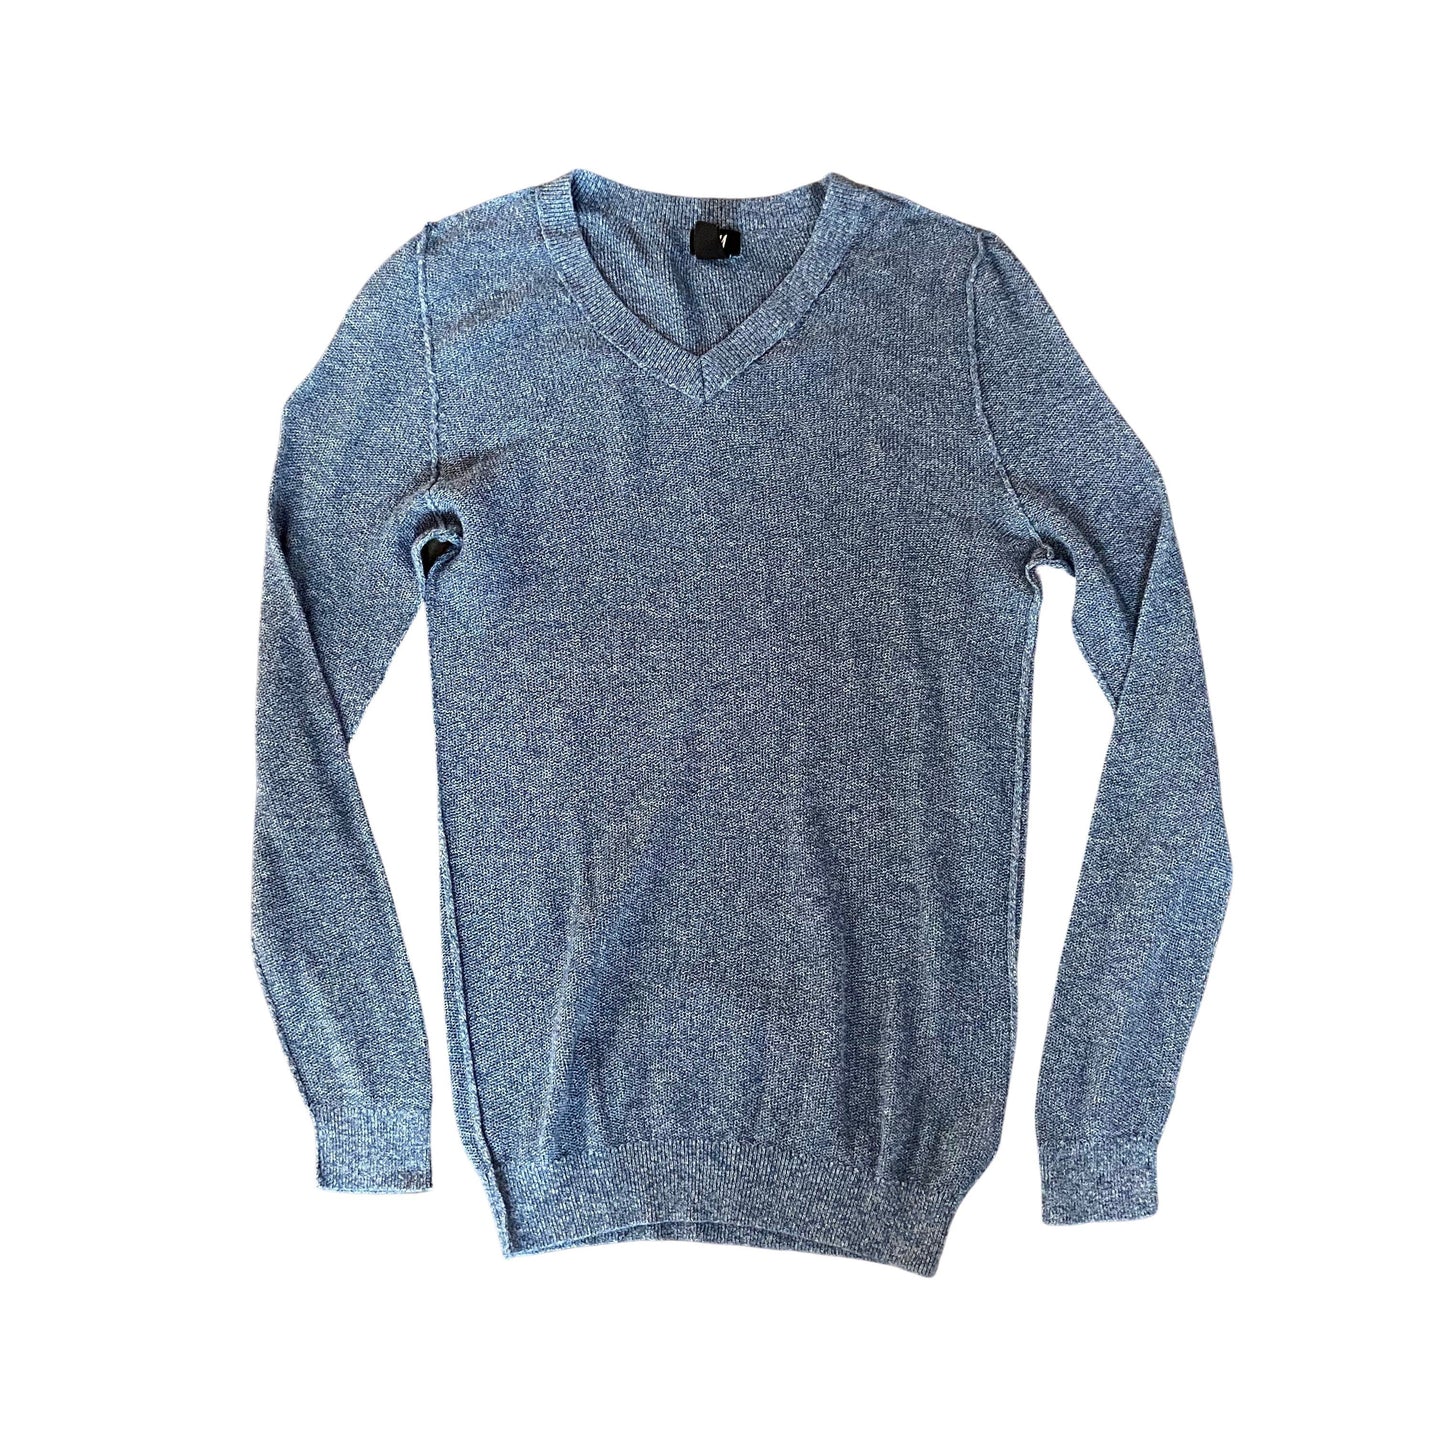 SILICON VALLEY: Ron Laflamme's Blue Sweater